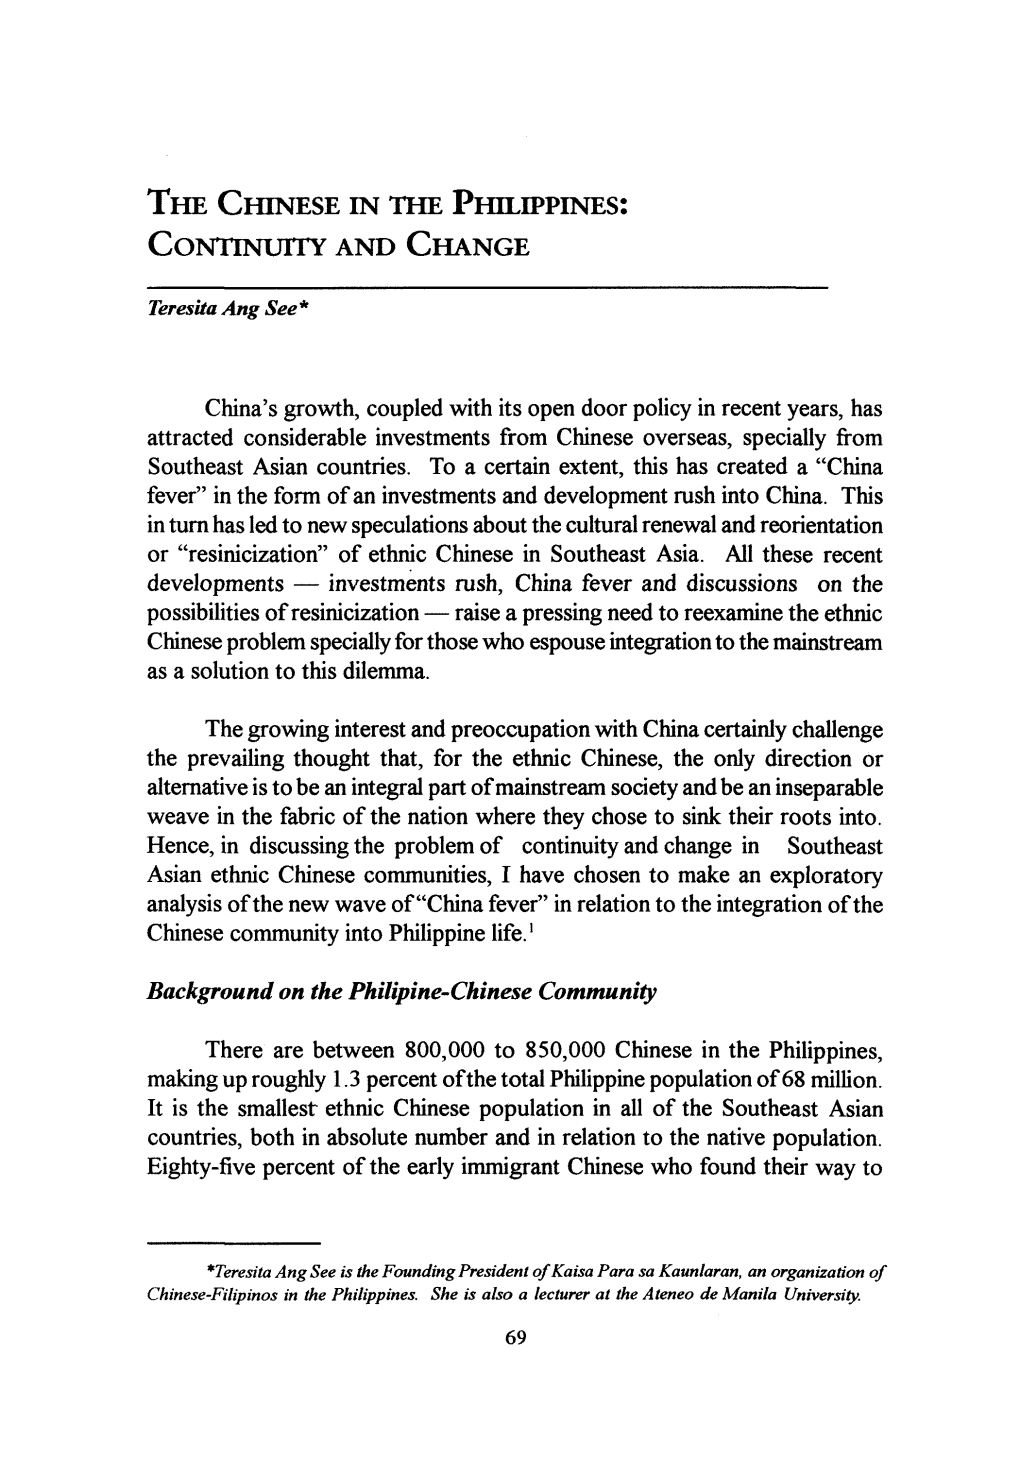 The Chinese in the Philippines: Continuity and Change